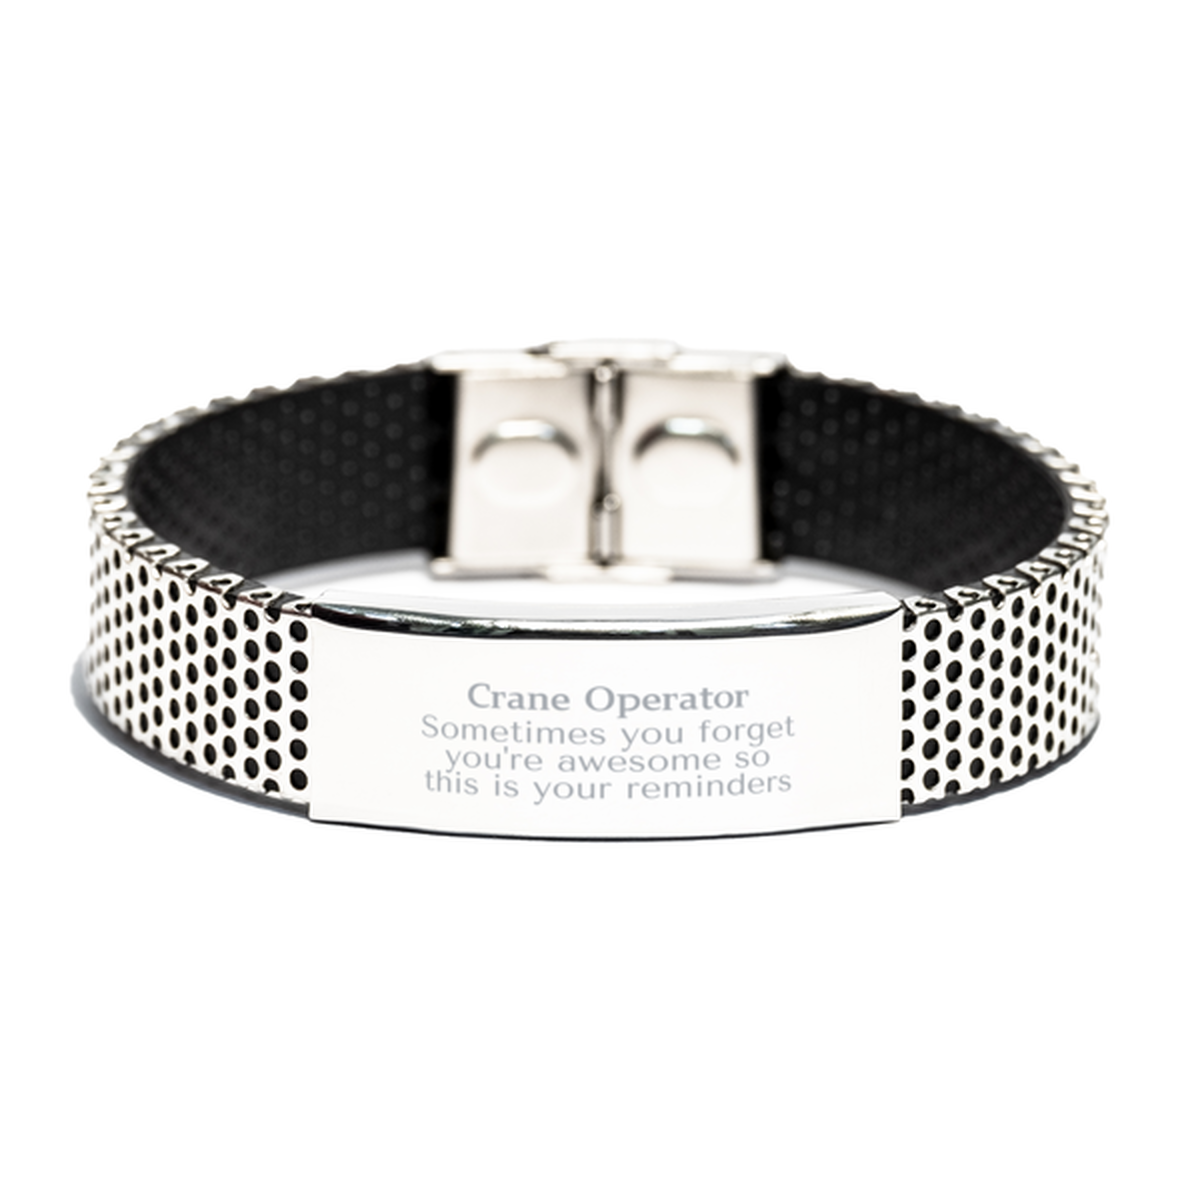 Sentimental Crane Operator Stainless Steel Bracelet, Crane Operator Sometimes you forget you're awesome so this is your reminders, Graduation Christmas Birthday Gifts for Crane Operator, Men, Women, Coworkers